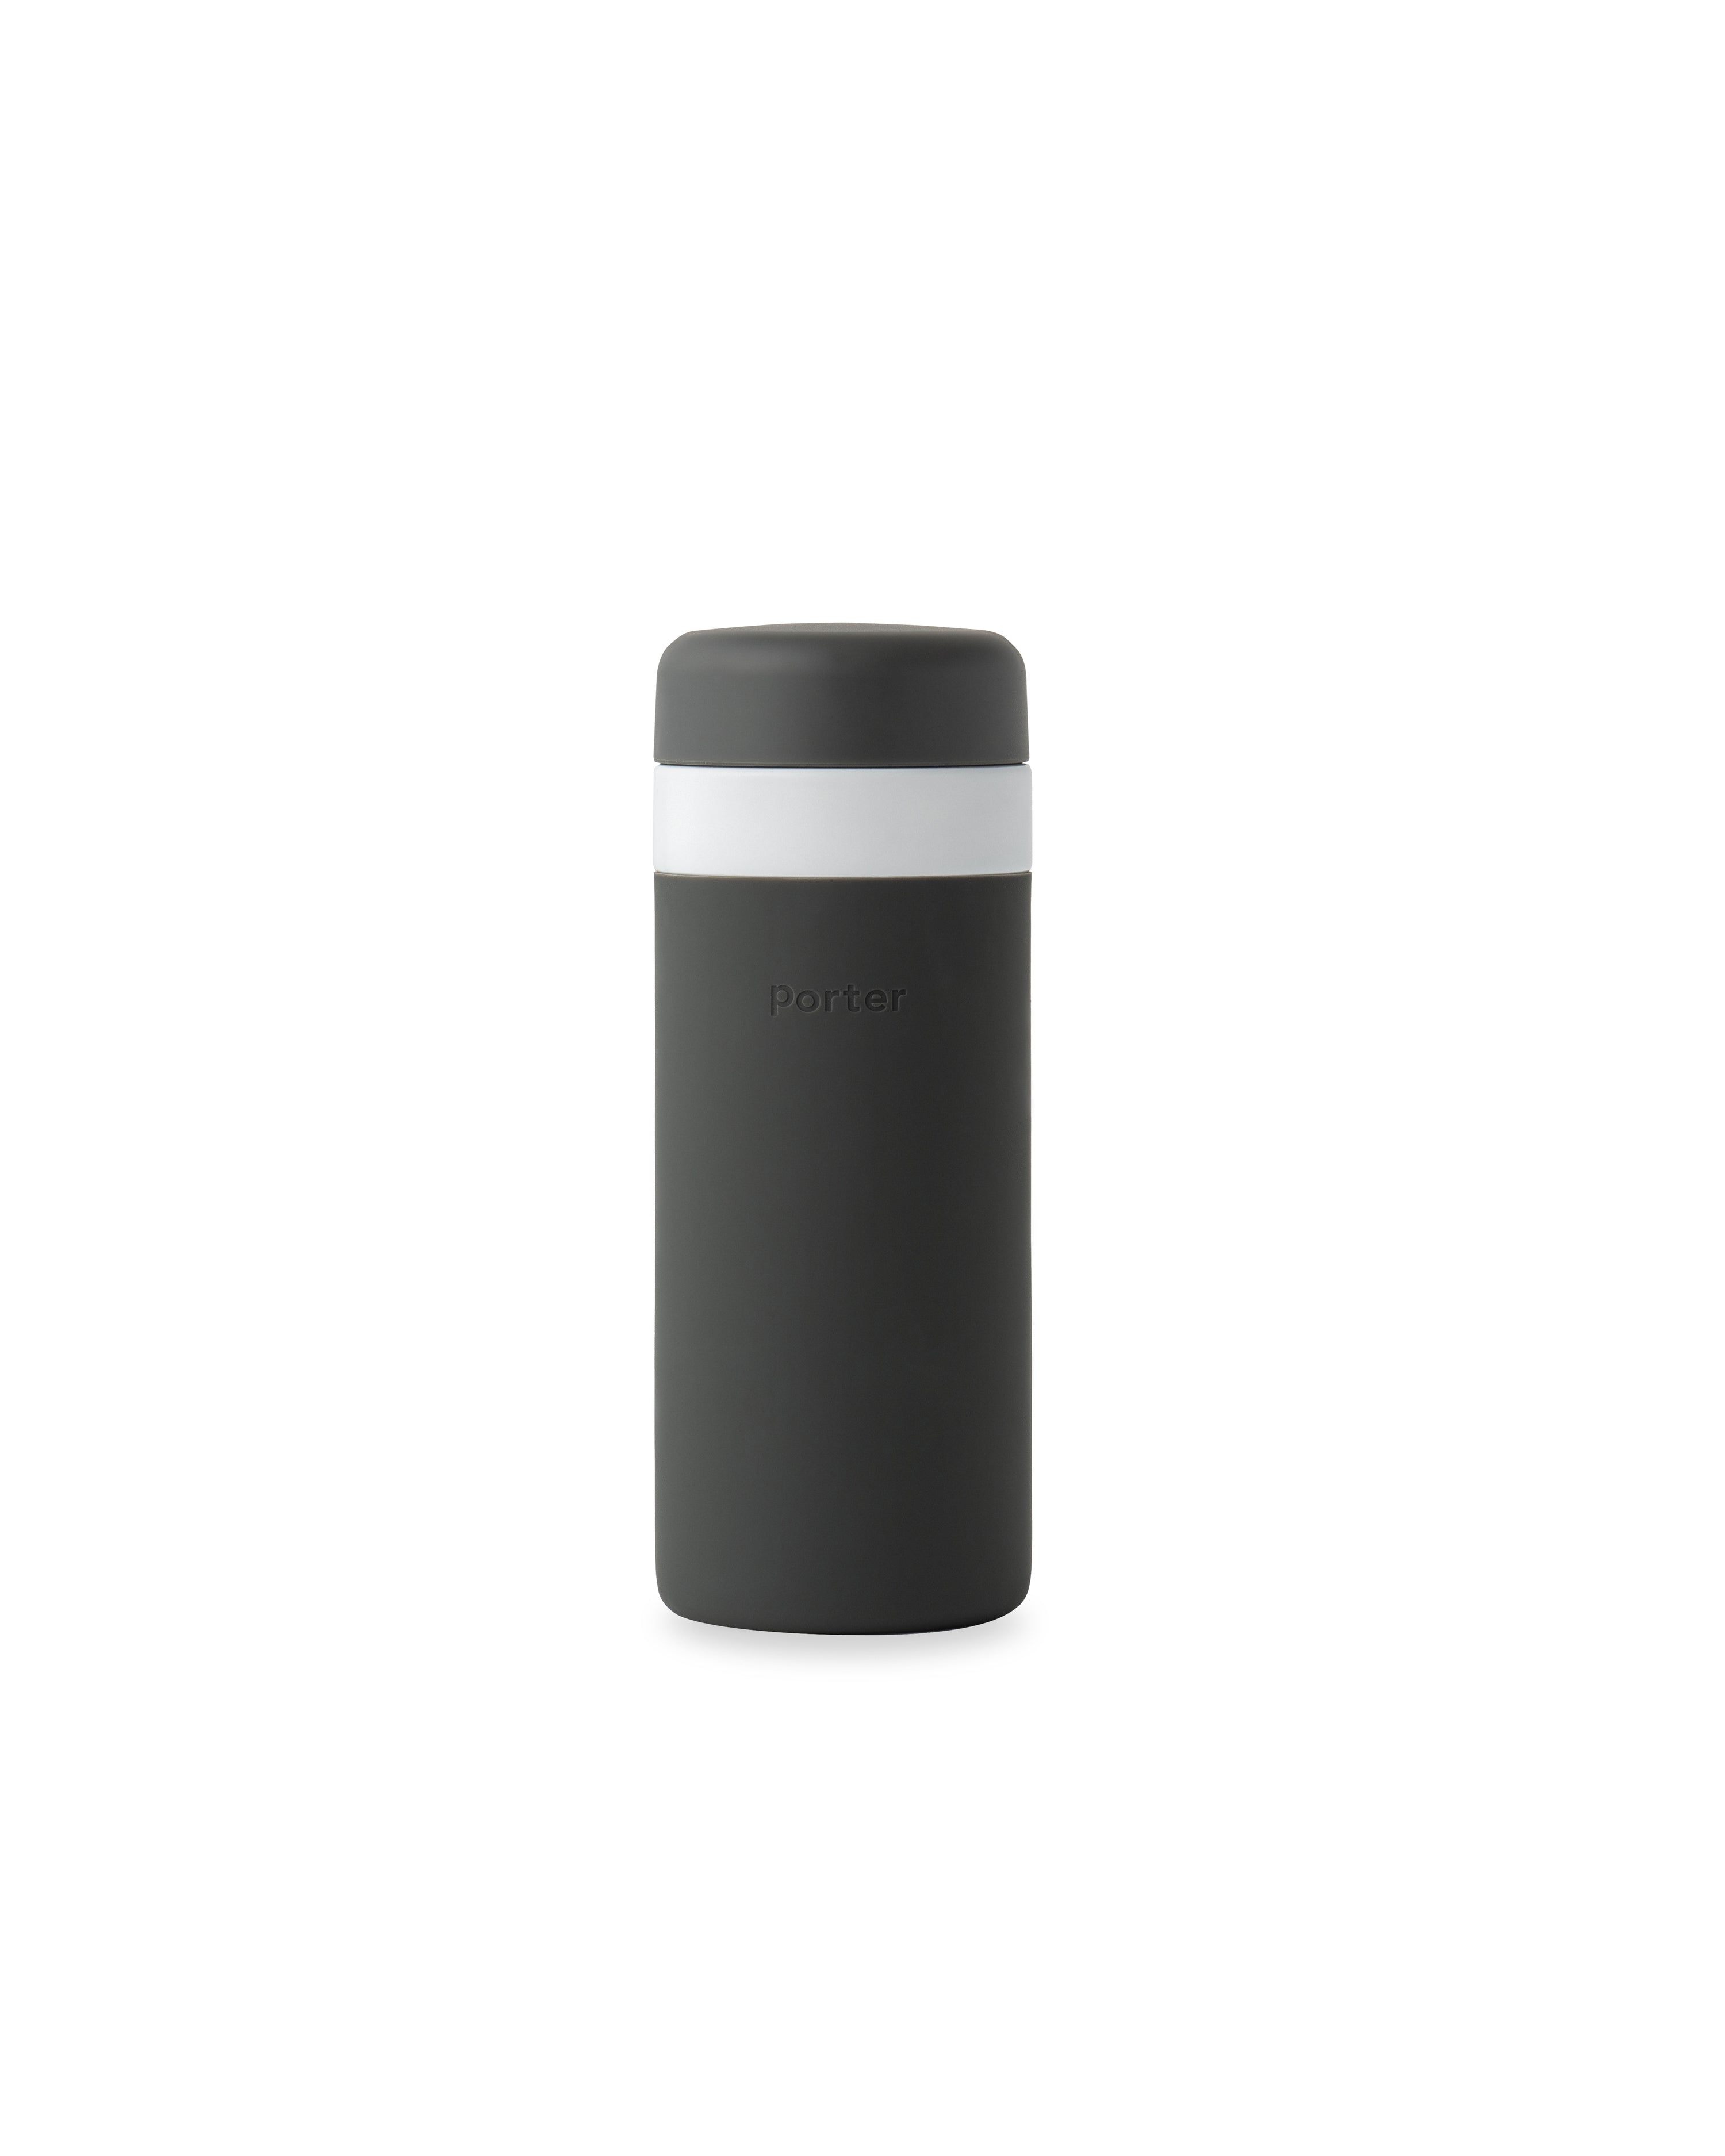 Keep Drinks Fresh With The W&P Porter Insulated Ceramic Bottle